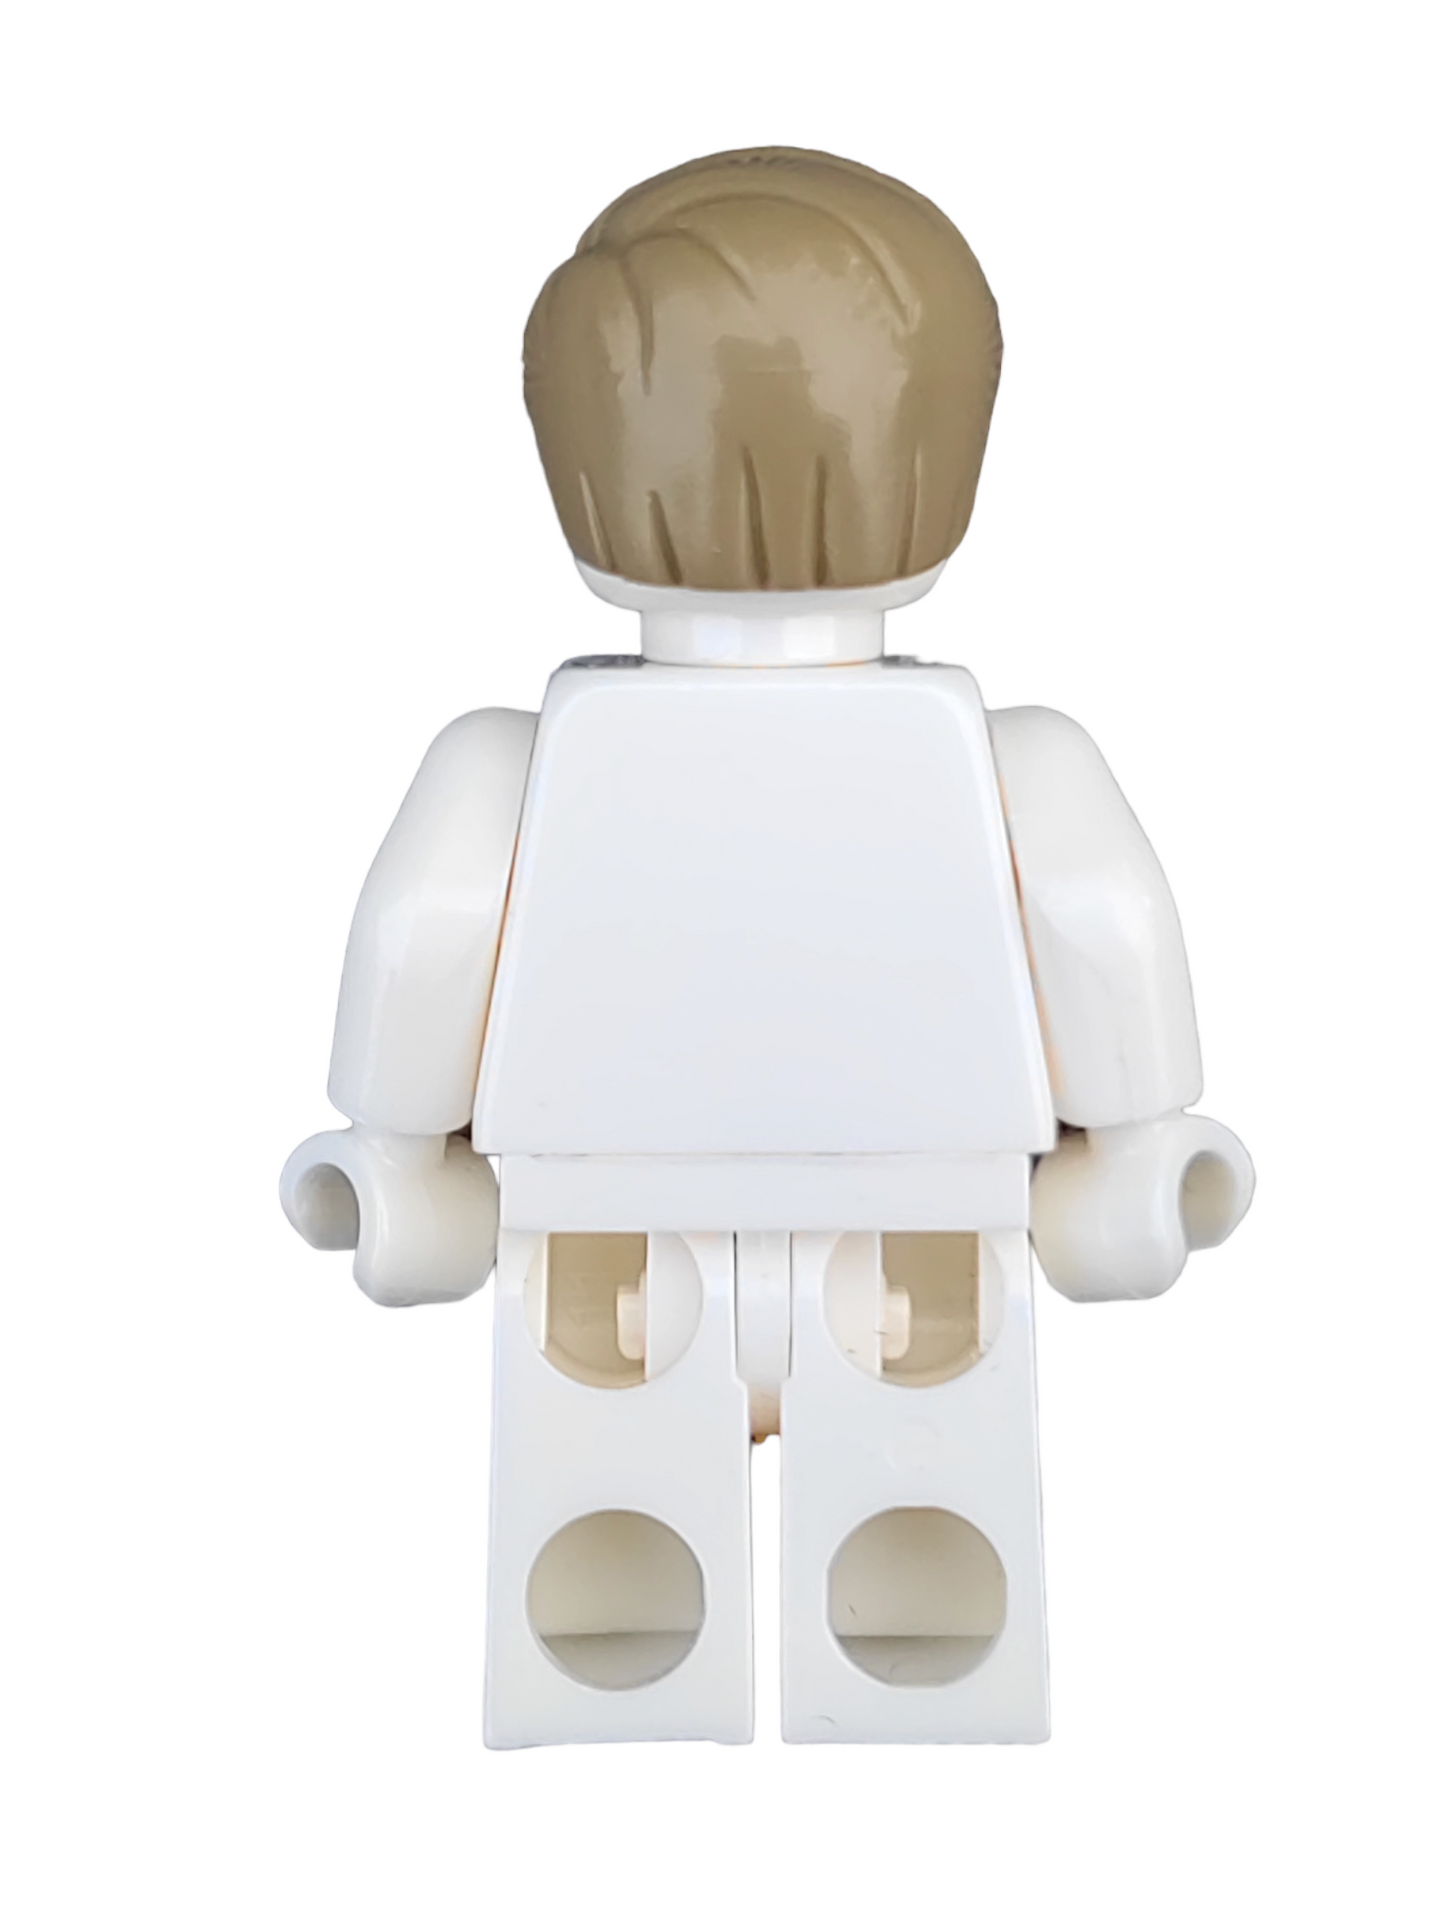 LEGO Wig, Brown Hair Short Combed to the Side - UB1246